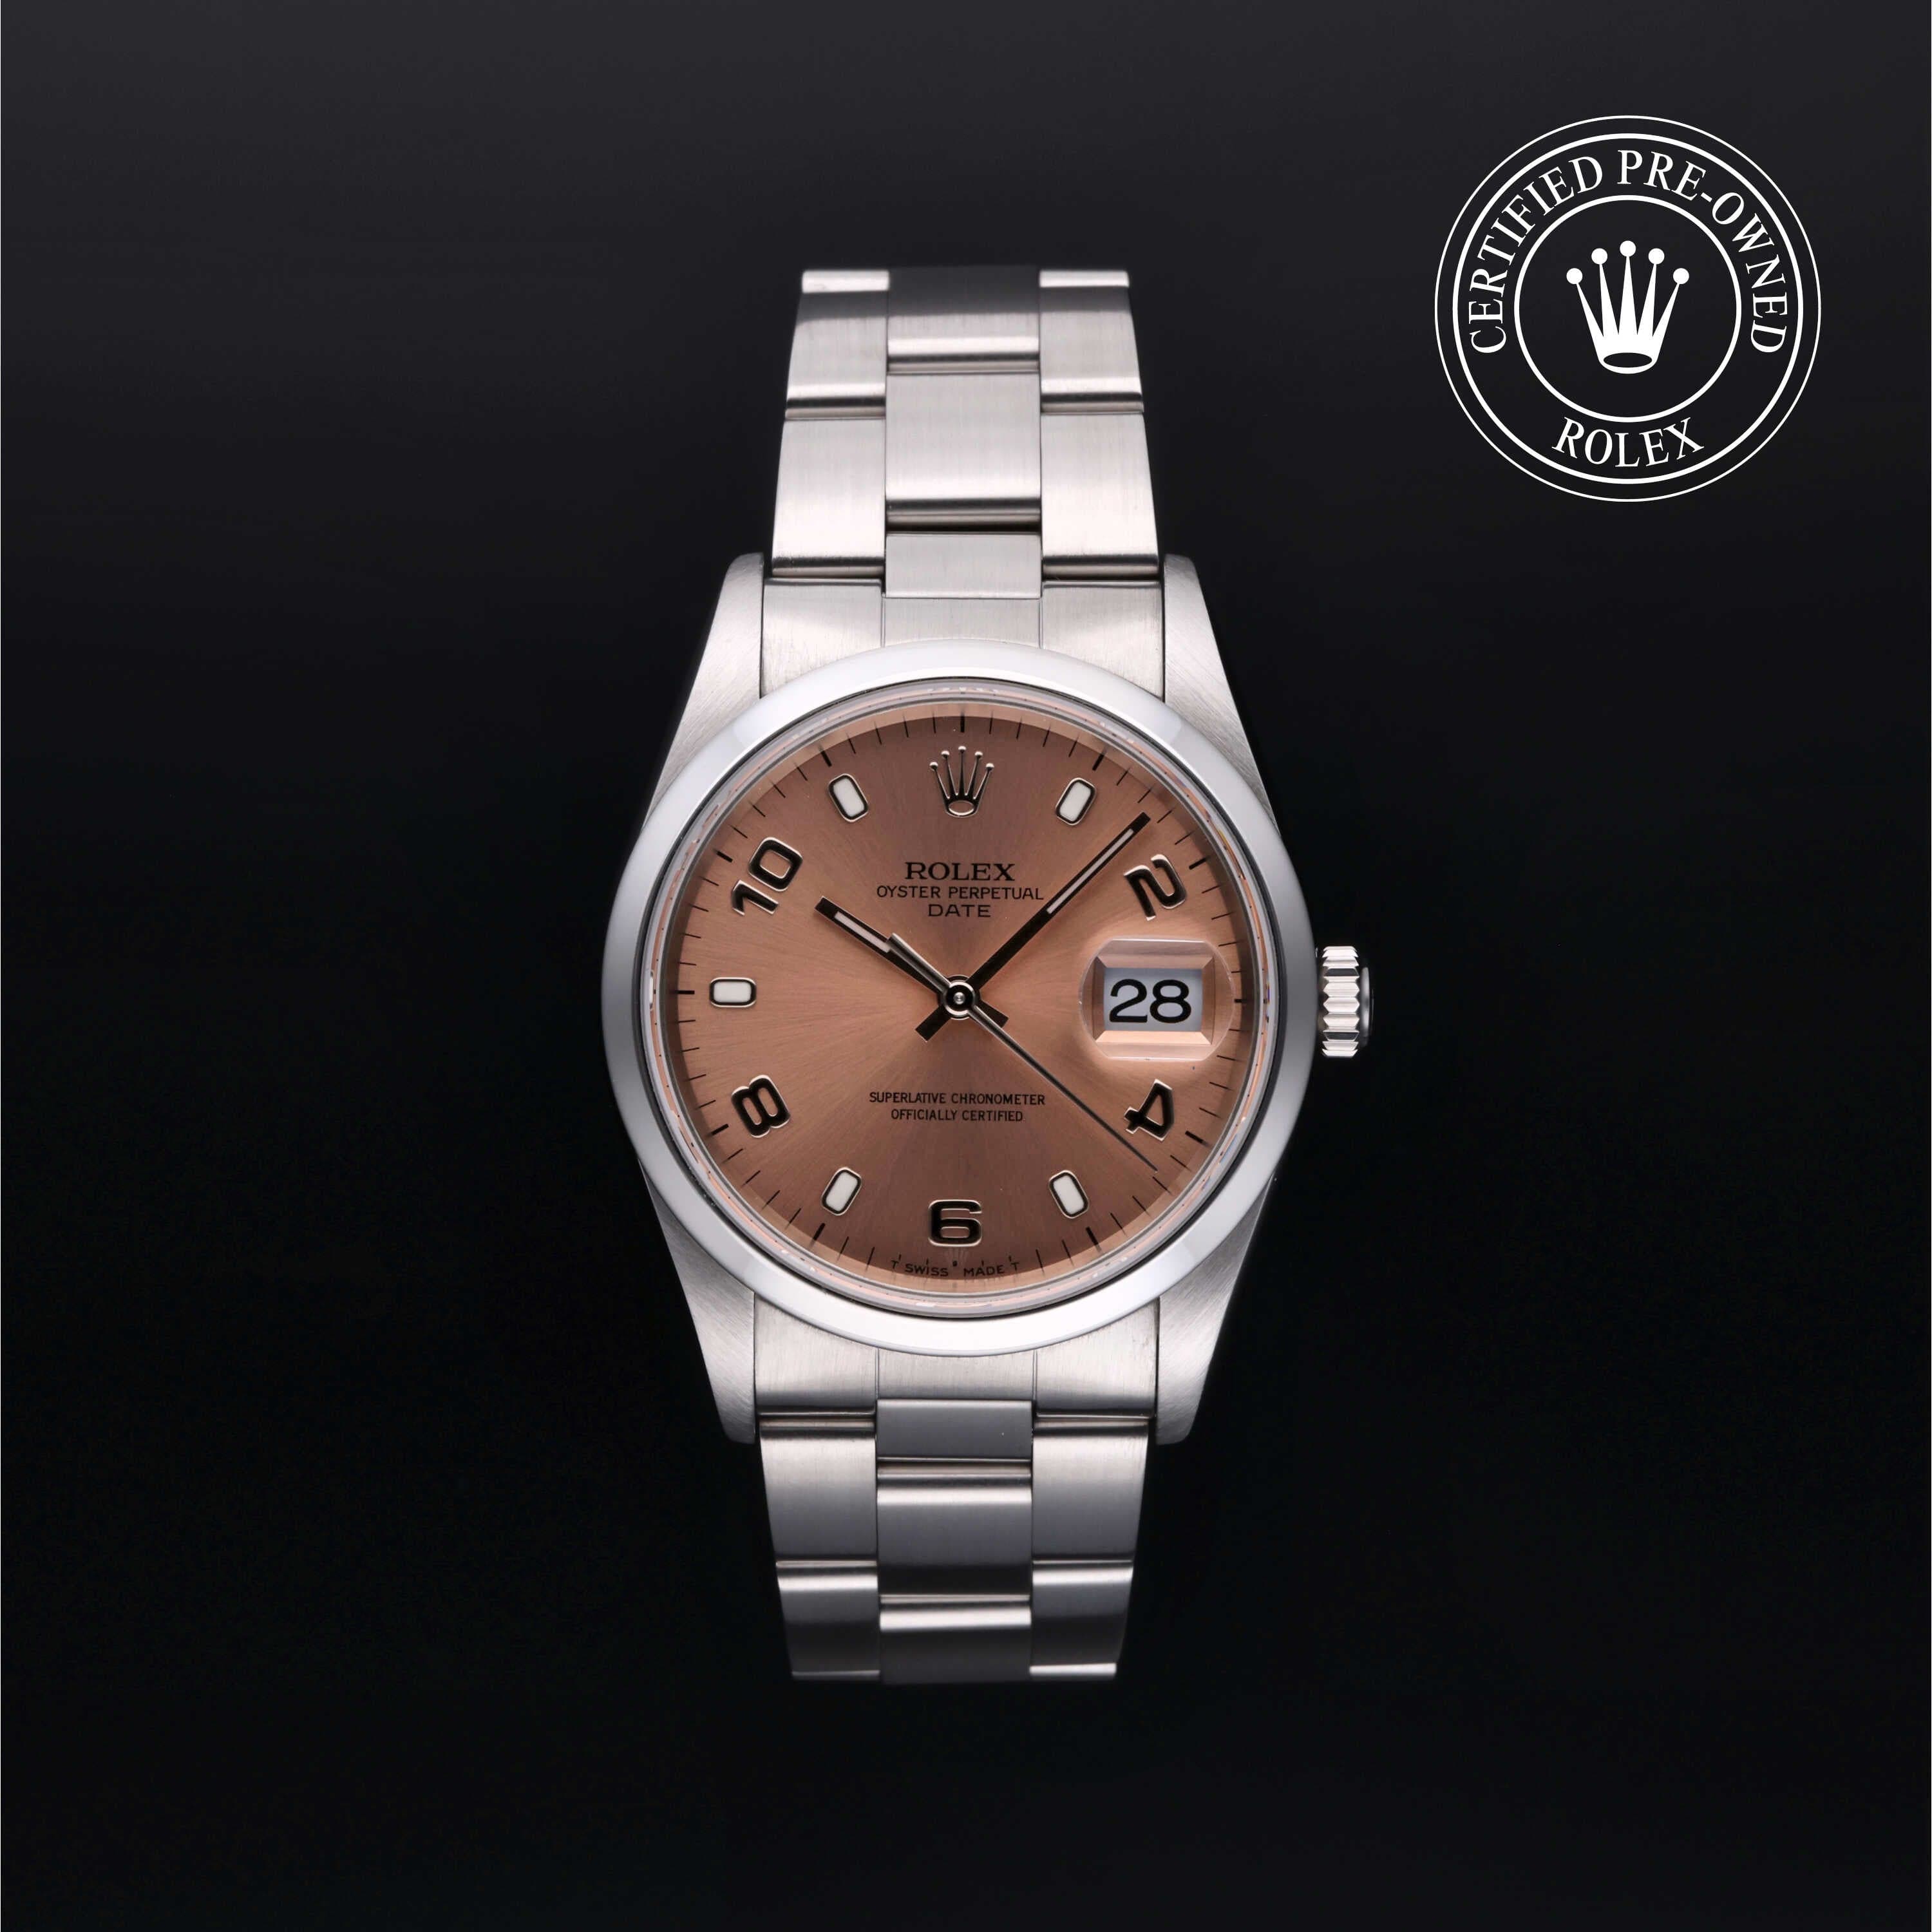 Rolex Certified Pre-Owned Oyster Perpetual in Oyster, 34 mm, Stainless Steel 15200 watch available at Long's Jewelers.